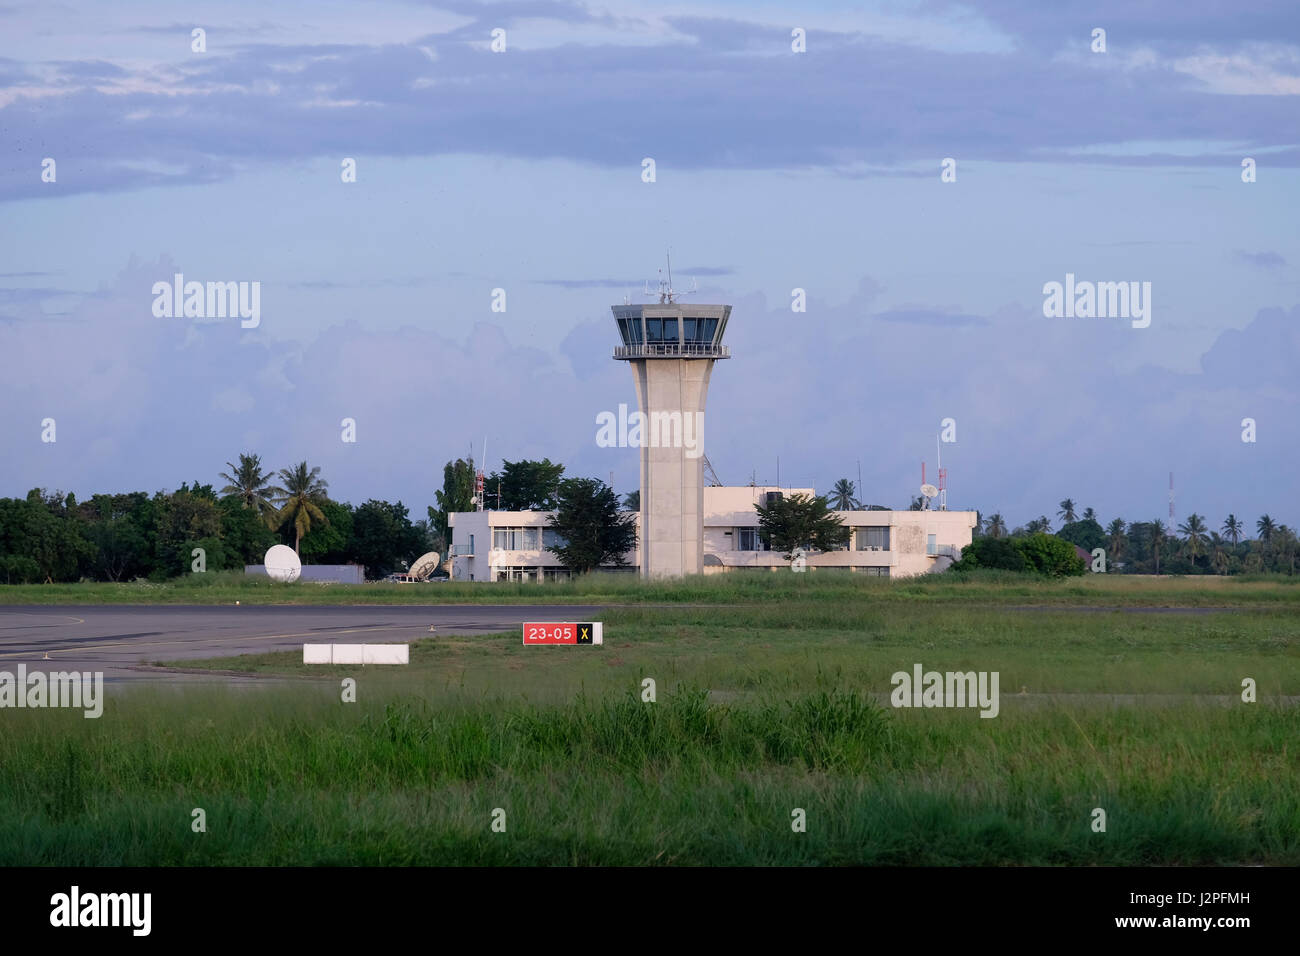 Air traffic control tower of the Julius nyerere airport in Dar es Salaam, the largest city of Tanzania in eastern Africa Stock Photo